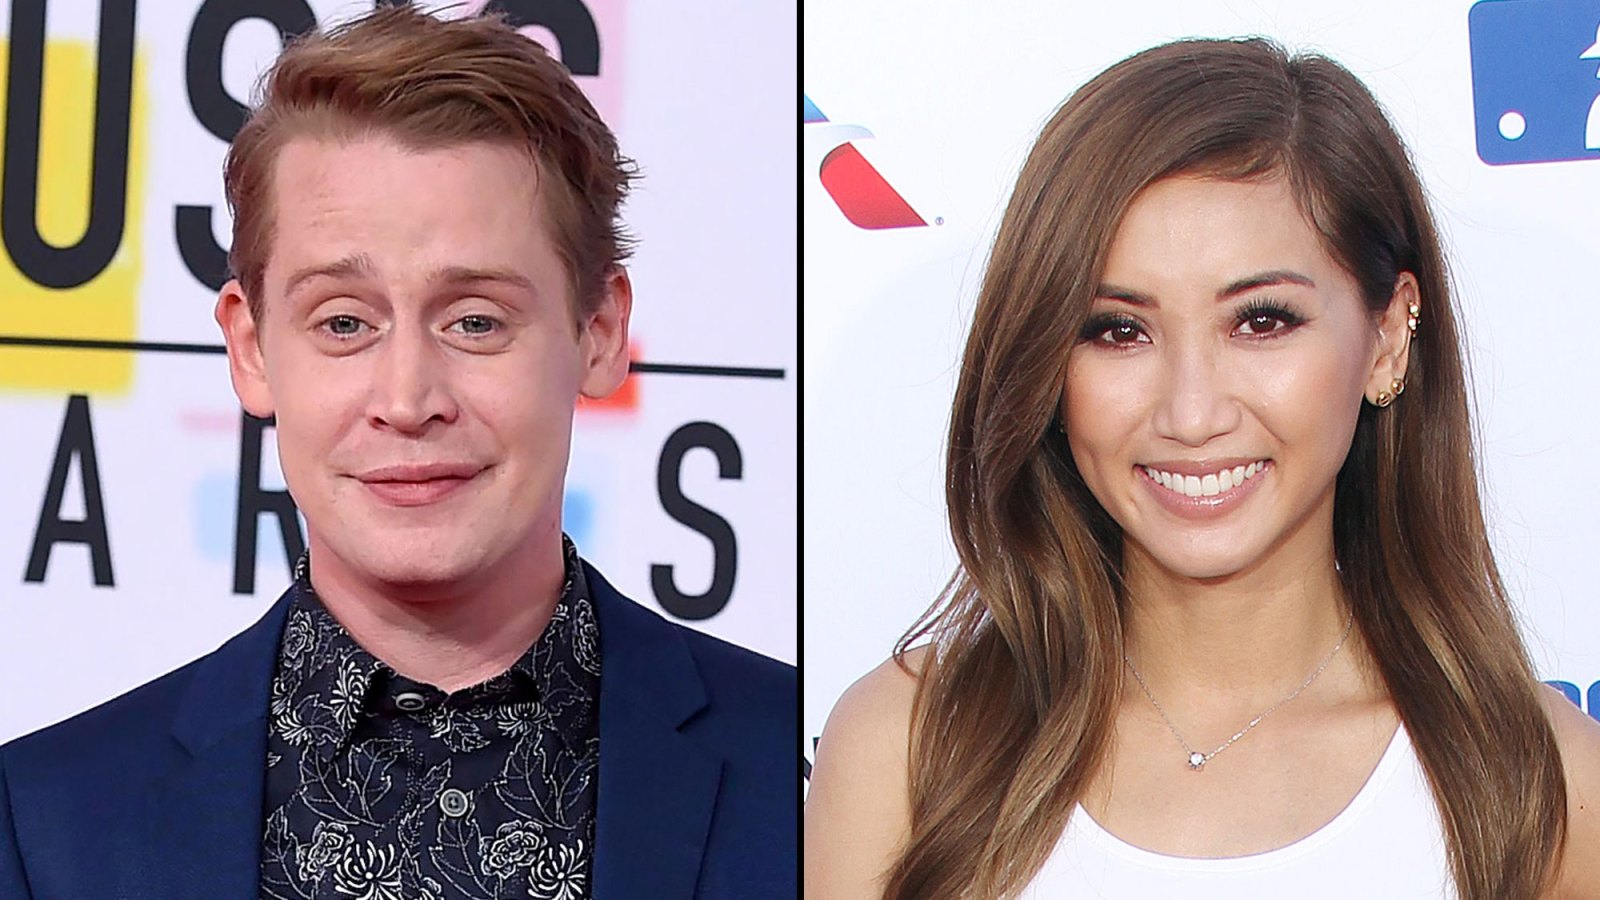 Macaulay Culkin and Brenda Song Are Engaged After 4 Years of Dating